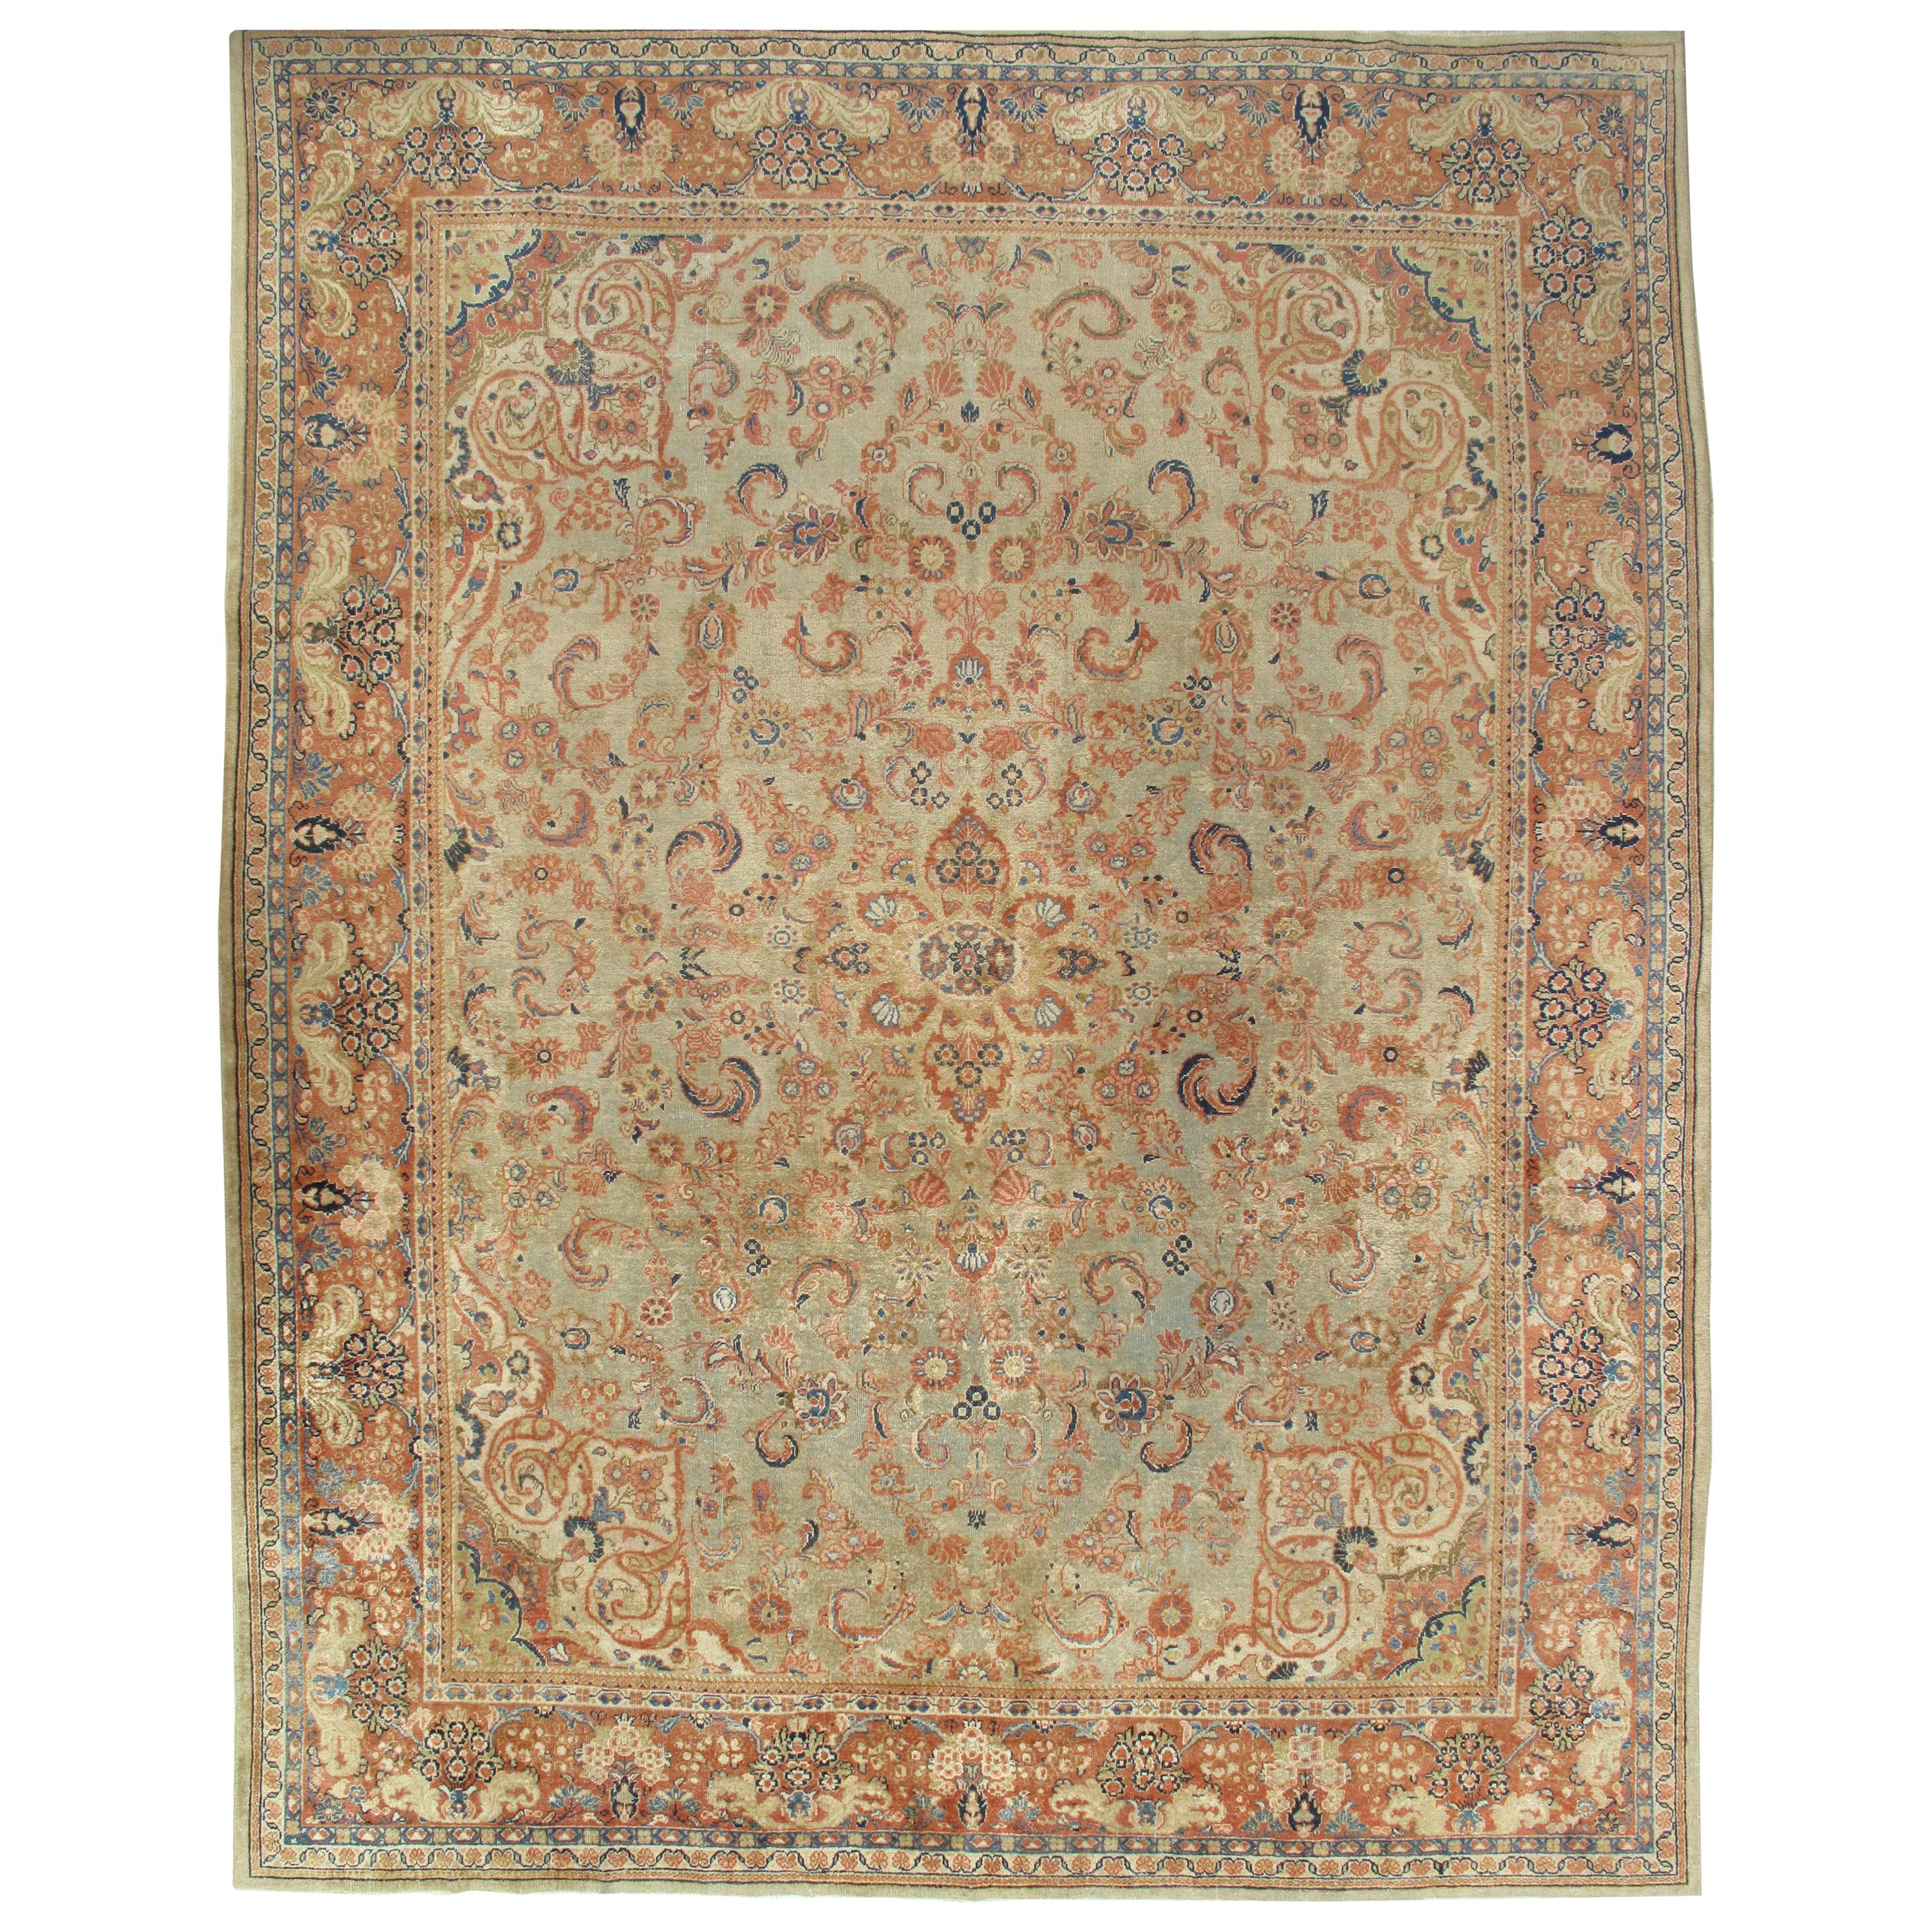 Antique Mahal Rug, Handmade Oriental Rug, Pale Green, Rust and Navy Blue